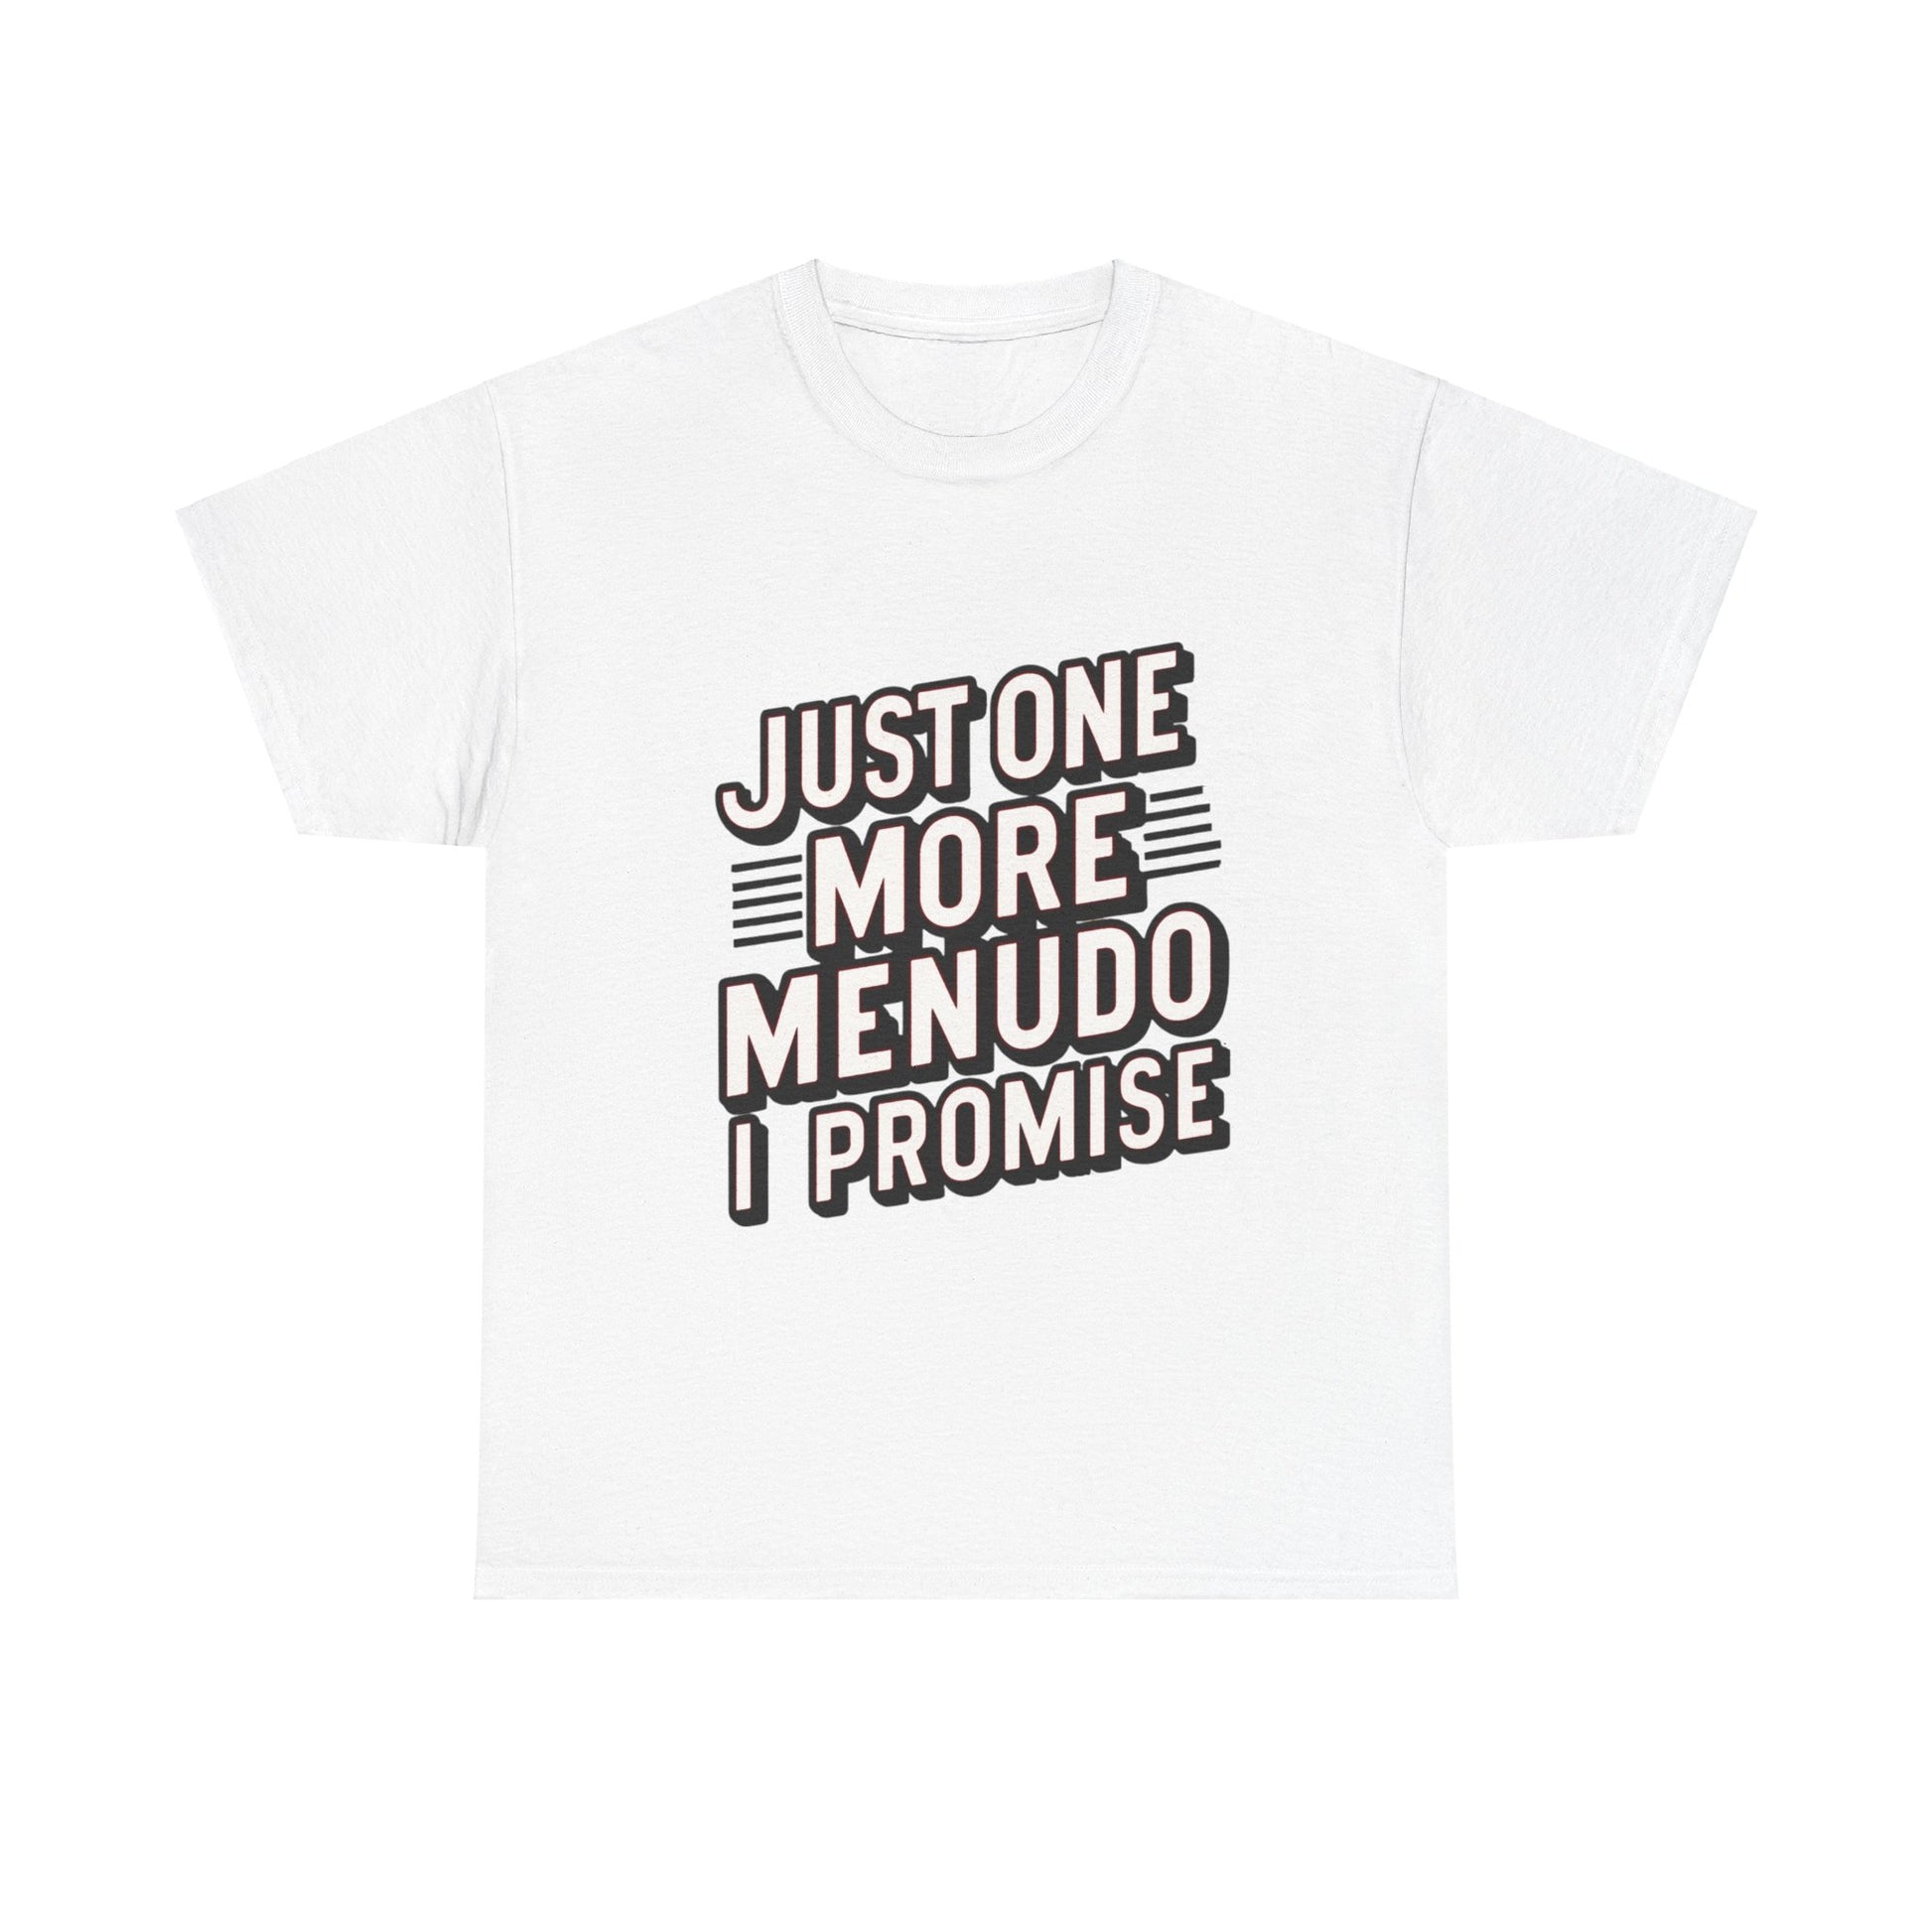 Just One More Menudo I Promise Mexican Food Graphic Unisex Heavy Cotton Tee Cotton Funny Humorous Graphic Soft Premium Unisex Men Women White T-shirt Birthday Gift-10